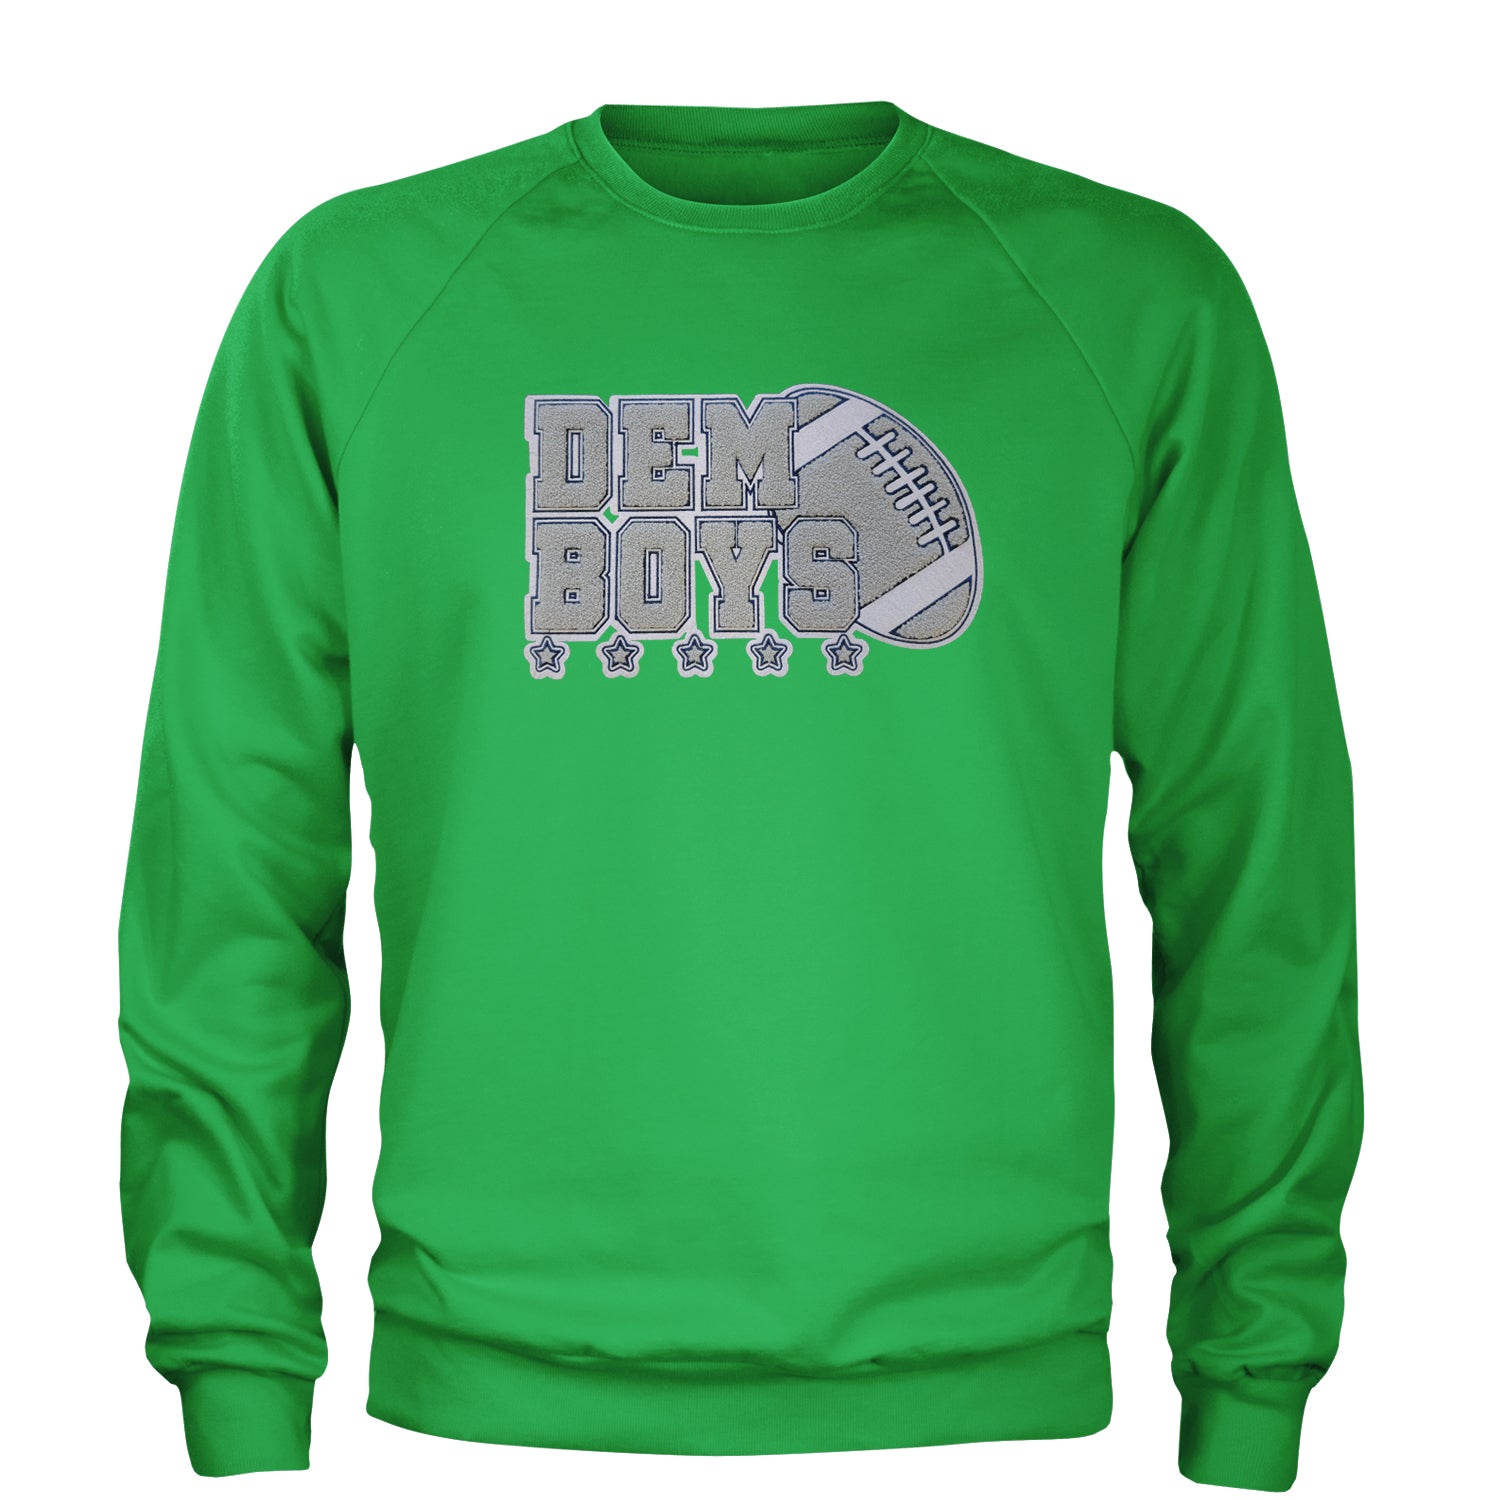 Dem Boys Embroidered Patch 2 Adult Crewneck Sweatshirt dallas, fan, jersey, team, texas by Expression Tees